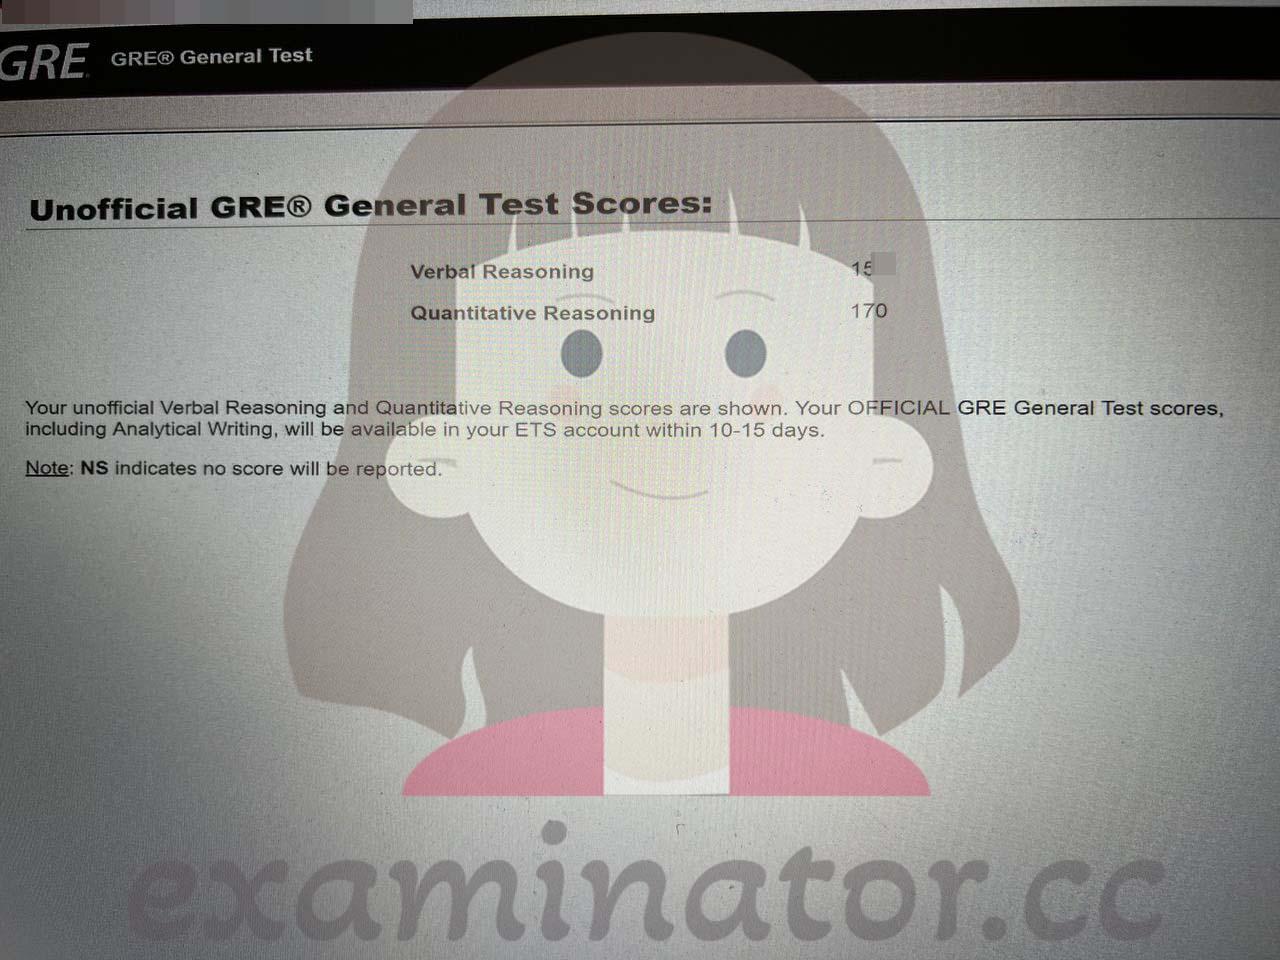 🇺🇸 'Oh My God!' Exclaims Thrilled American GRE Customer Who Hired Our Experts to Take Their GRE Test, Pays Balance Instantly! 💰💨